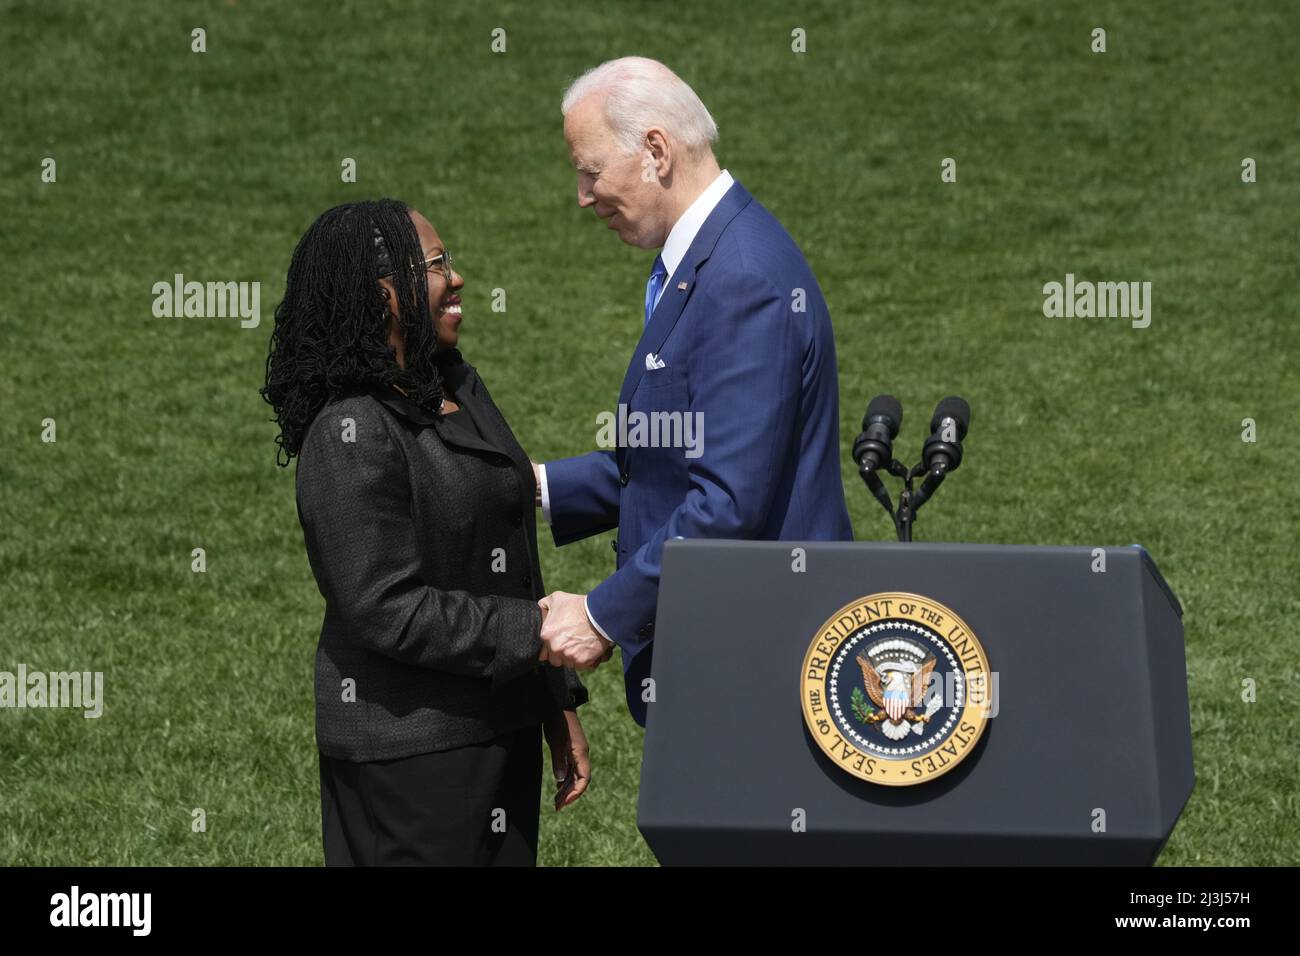 Washington DC, USA. 08th Apr, 2022. United States President Joe Biden completes his remarks commemorating Judge Ketanji Brown Jackson's historic, bipartisan US Senate confirmation of Judge Jackson to be an Associate Justice of the US Supreme Court on the South Lawn of the White House in Washington, DC on Friday, April 8, 2022.Credit: Chris Kleponis/CNP/MediaPunch Credit: MediaPunch Inc/Alamy Live News Stock Photo